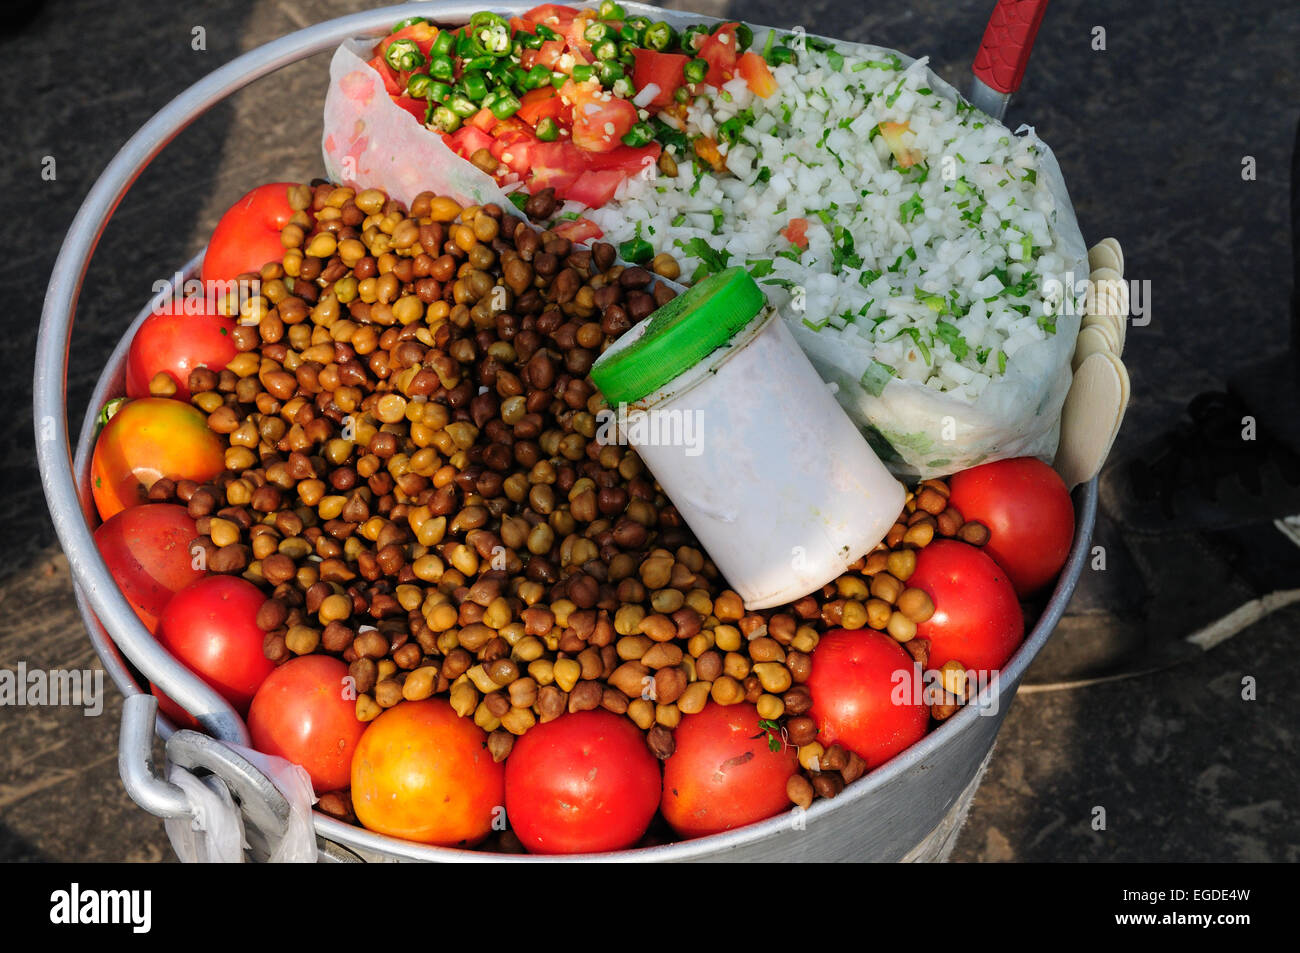 Indian street food of chickpeas tomato and onion in a clean galvanized Bucket at Delhi Railway Station India Stock Photo